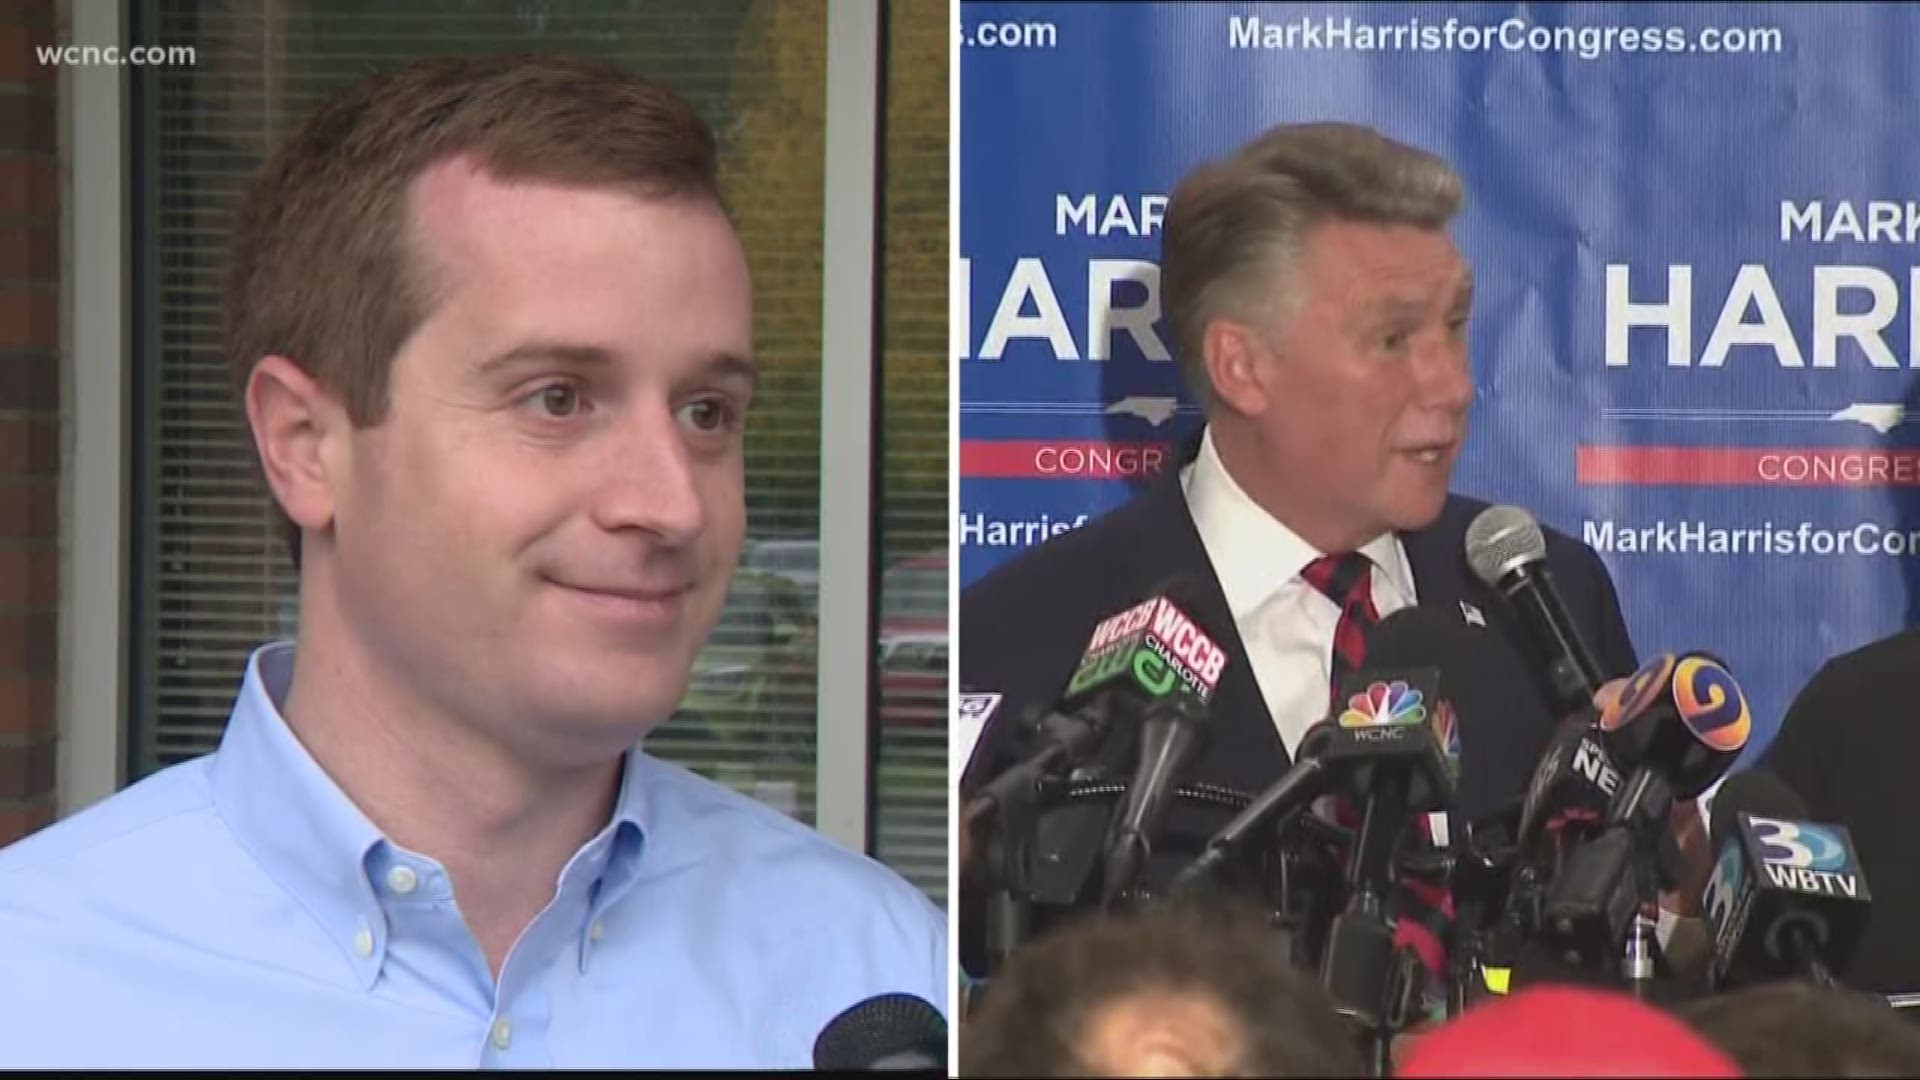 One of the nation's most hotly contested races, the 9th Congressional District of North Carolina, is still up in the air as Republican Mark Harris and Democrat Dan McCready are separated by less than one point.